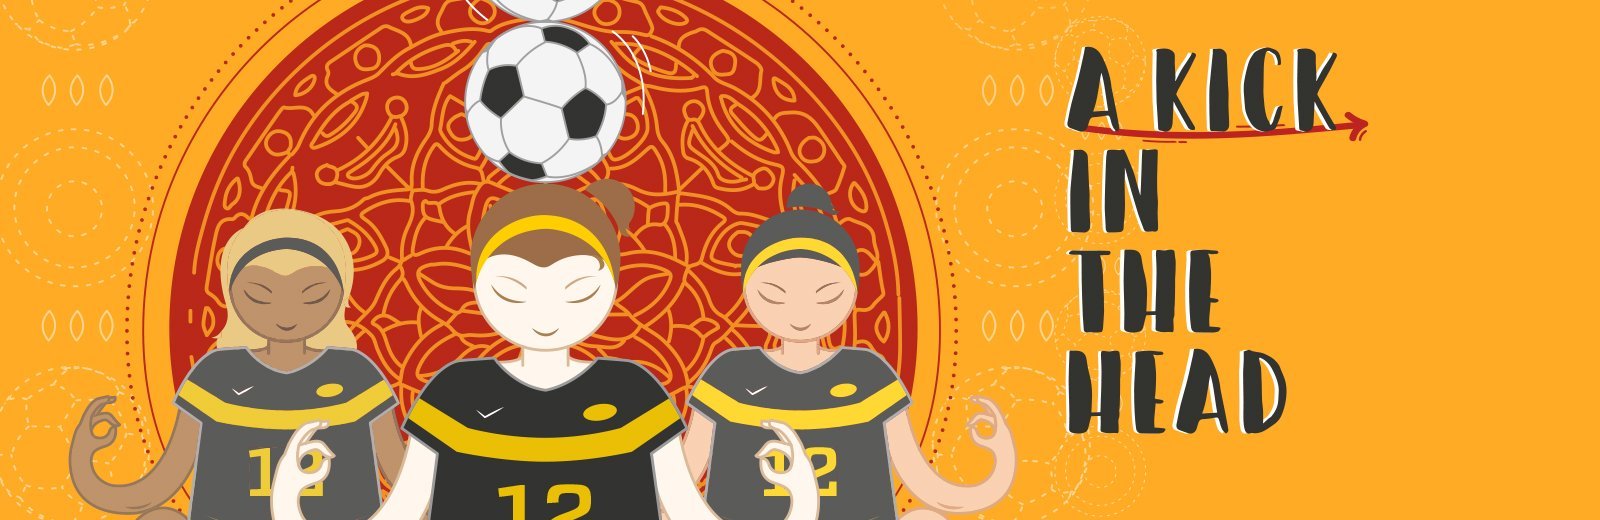 The science of mindfulness keeps Michigan Tech's soccer team centered on success.